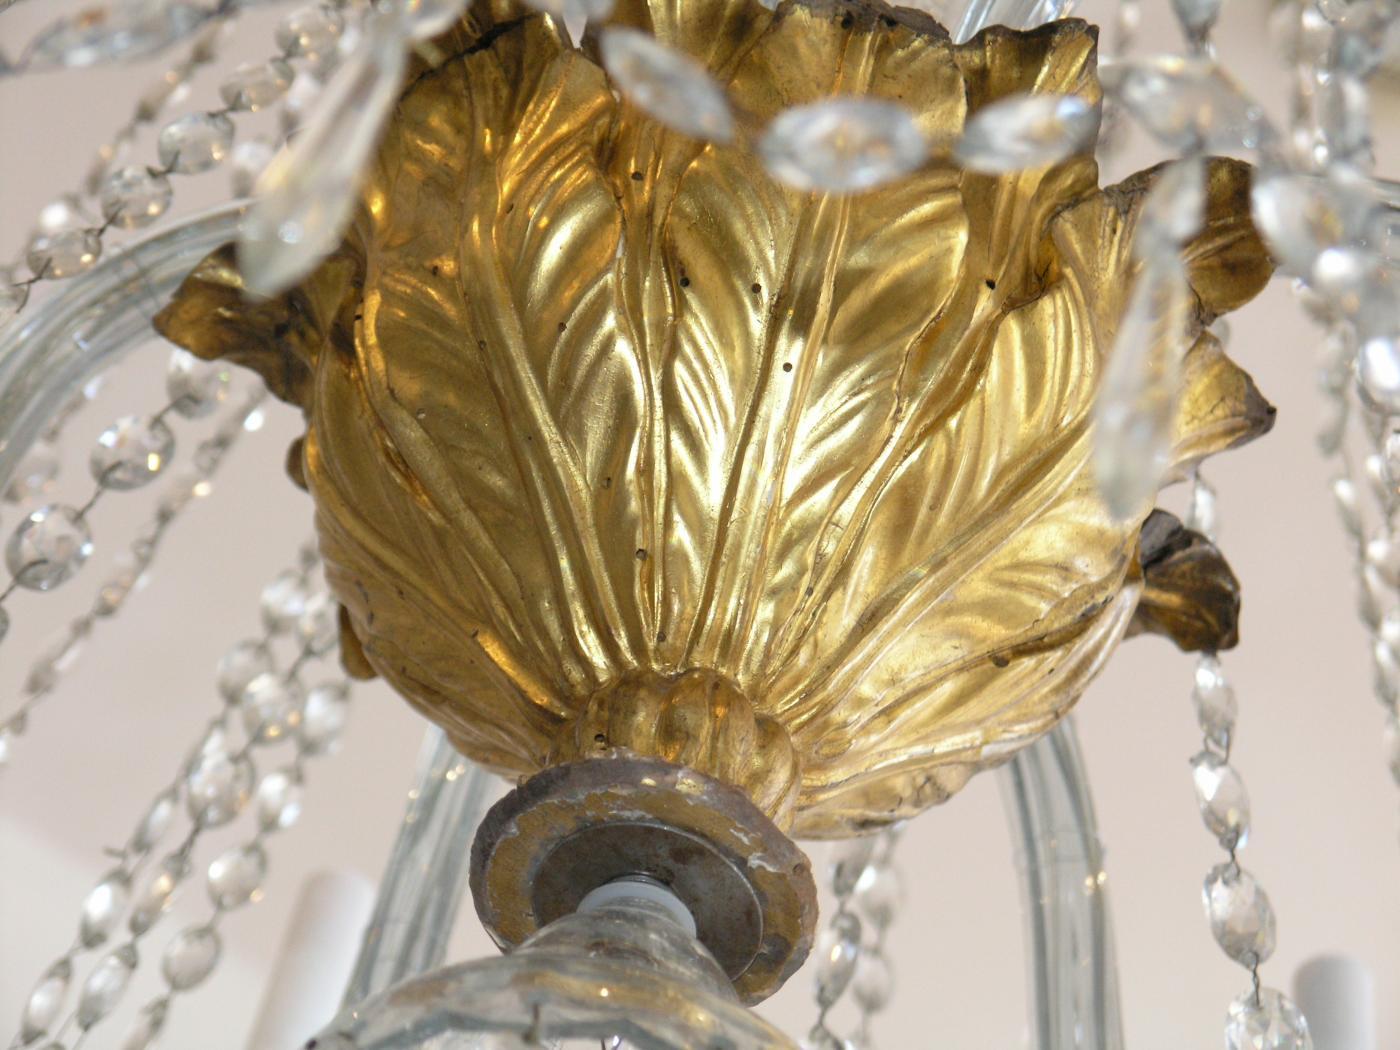 Chamfered crystal columnar standard above a giltwood urn issuing scrolled candle arms.